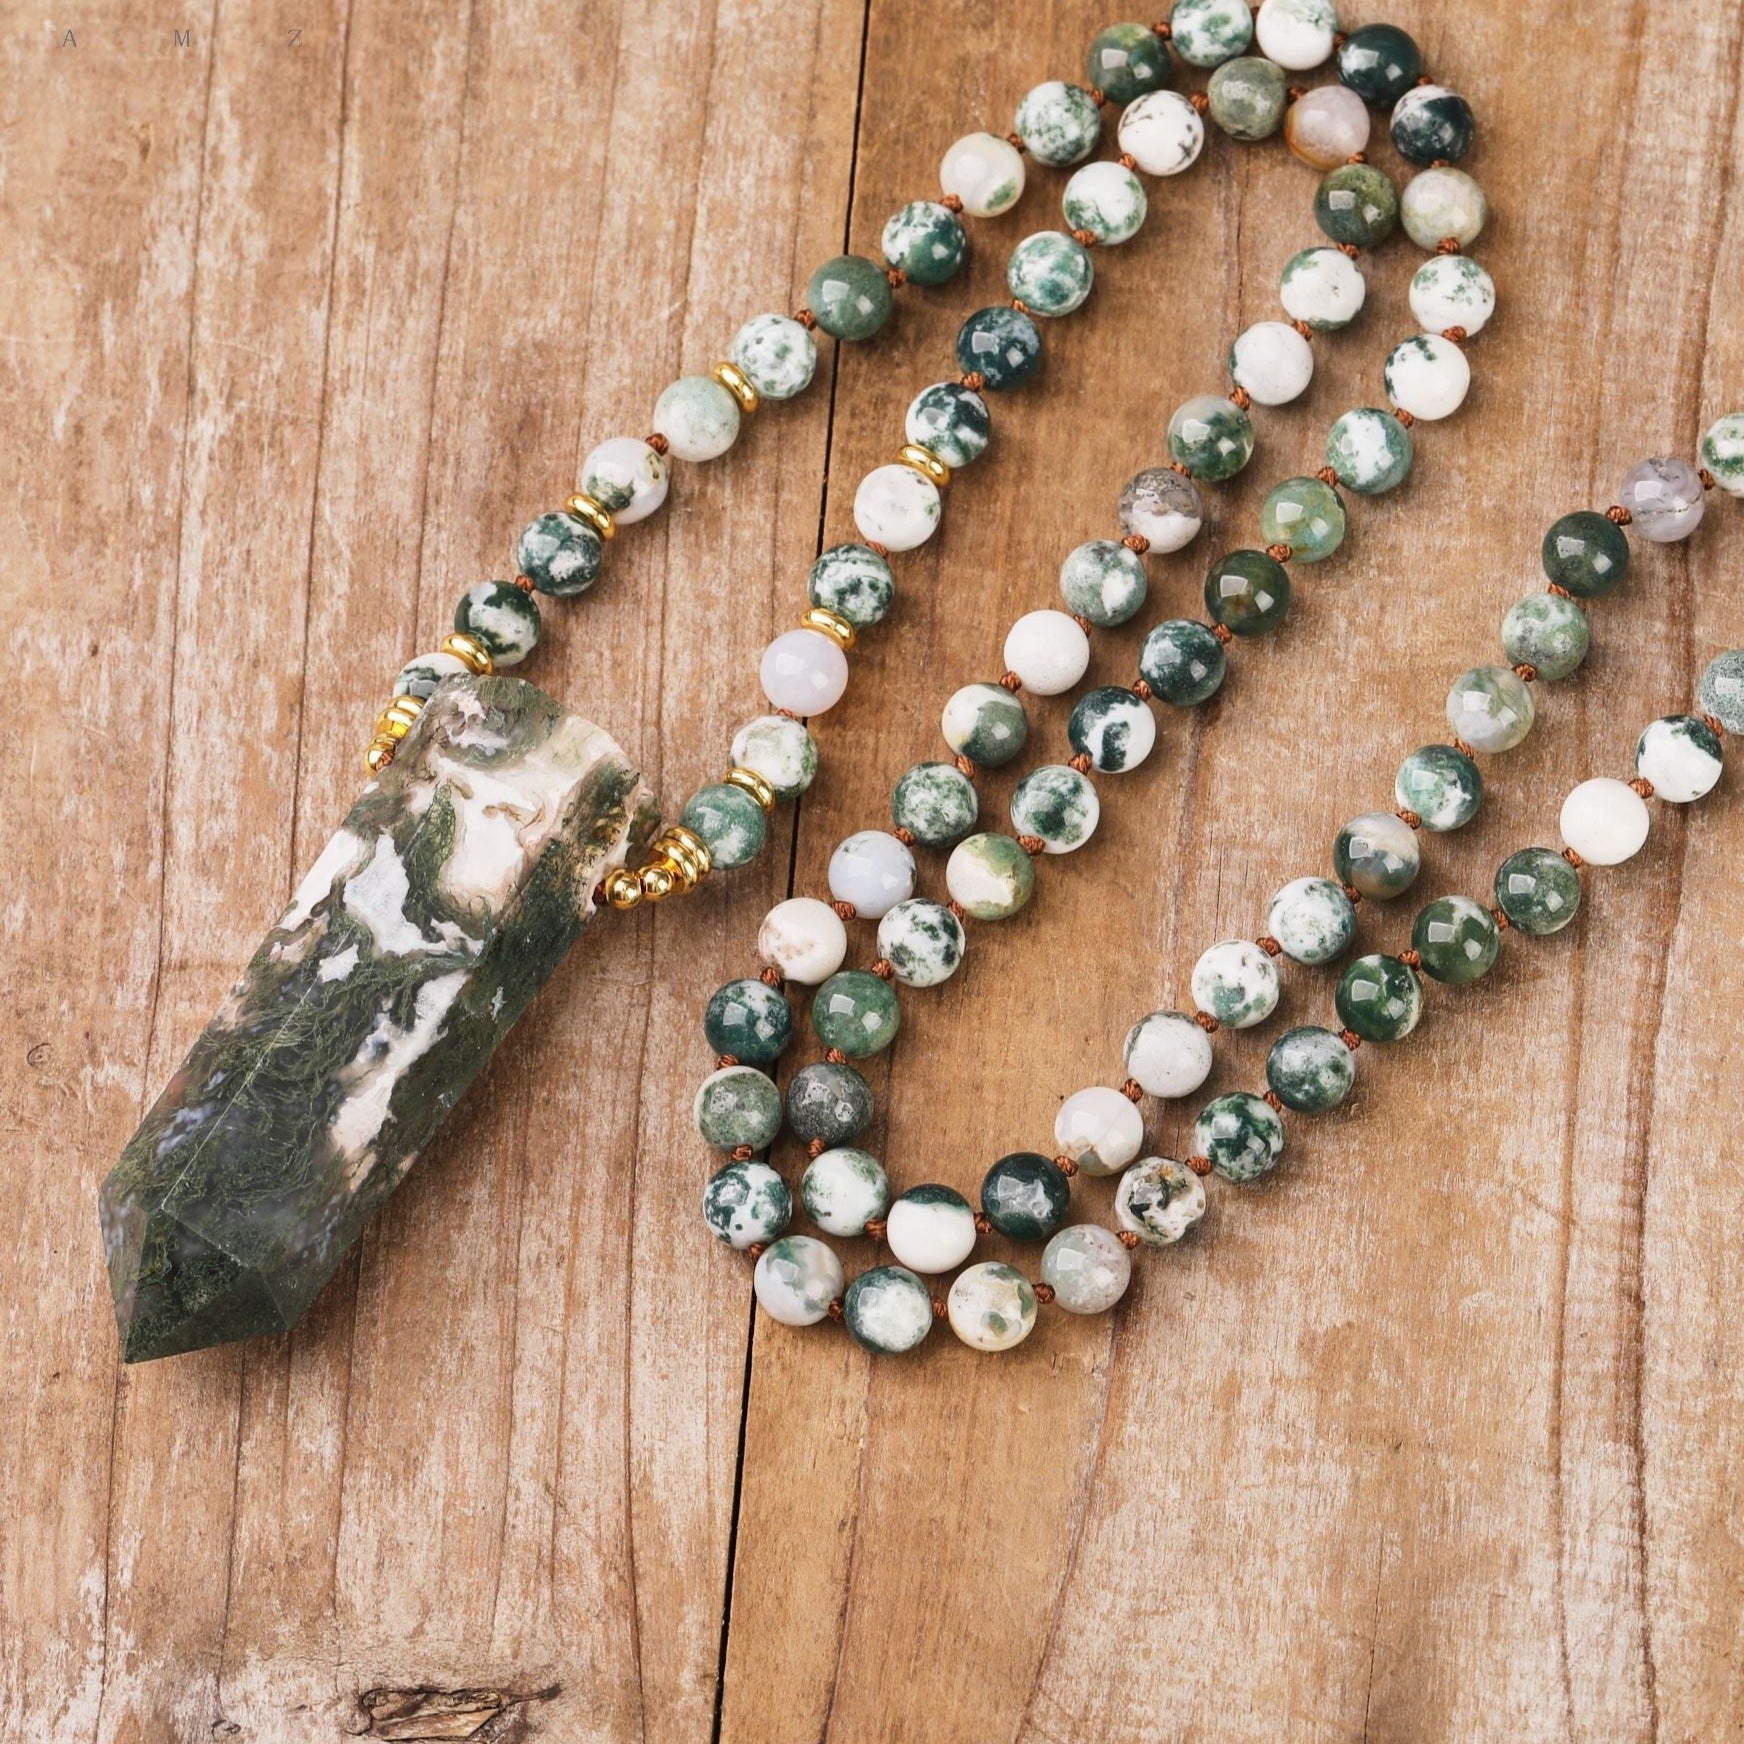 108 Natural Moss Agate Stone Mala Bead Necklace